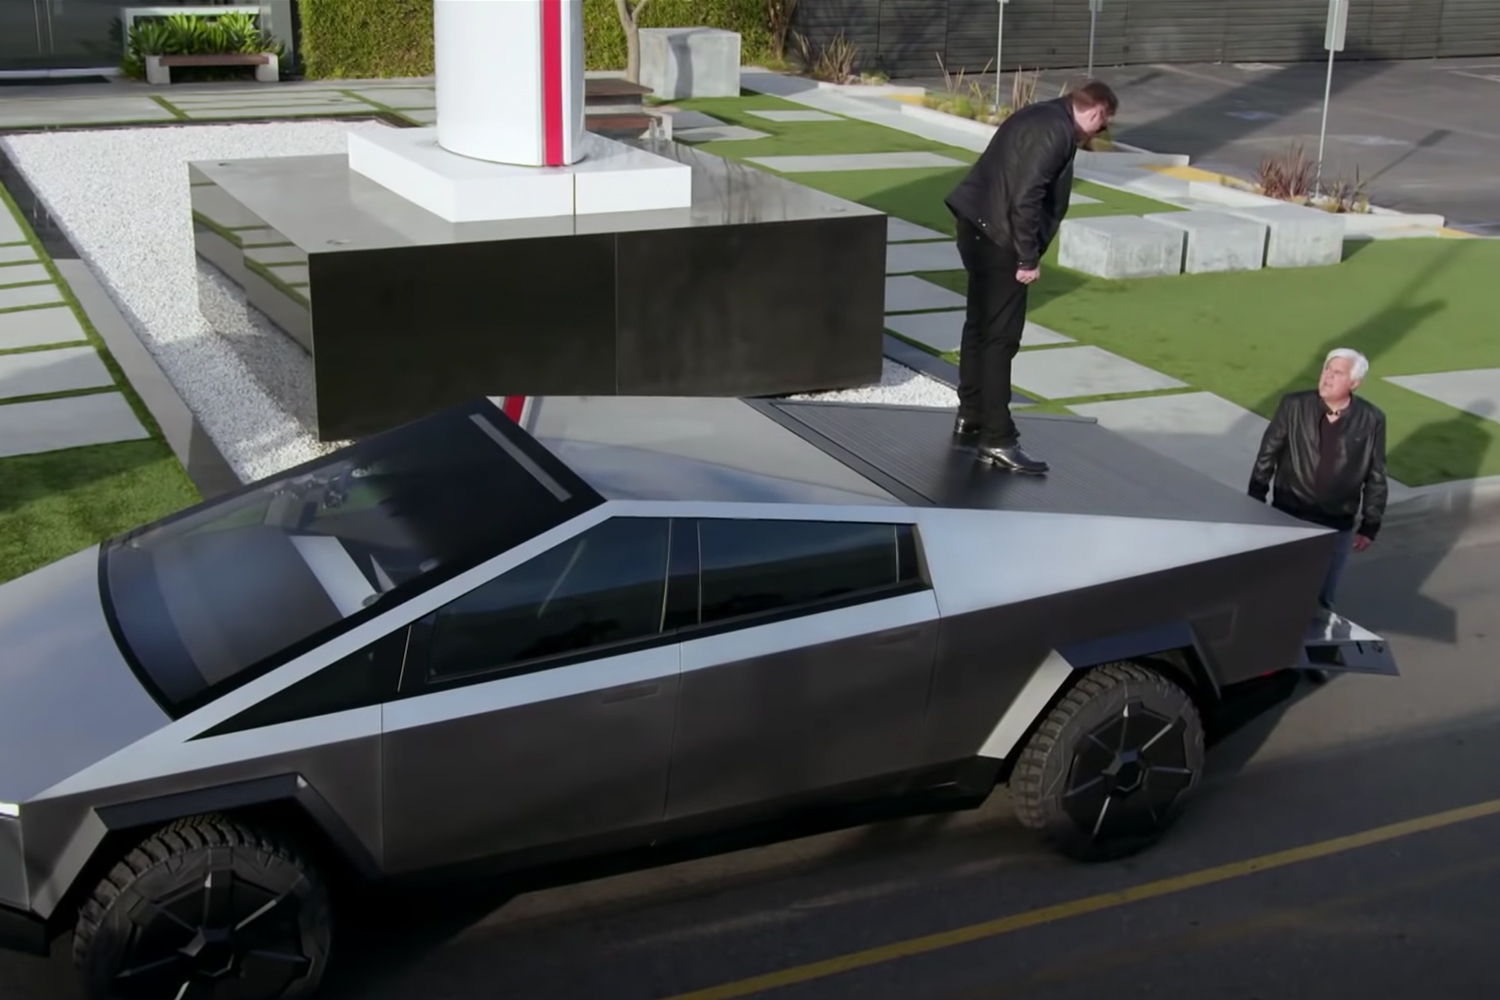 Elon Musk stands on the Cybertruck bed cover next to Jay Leno